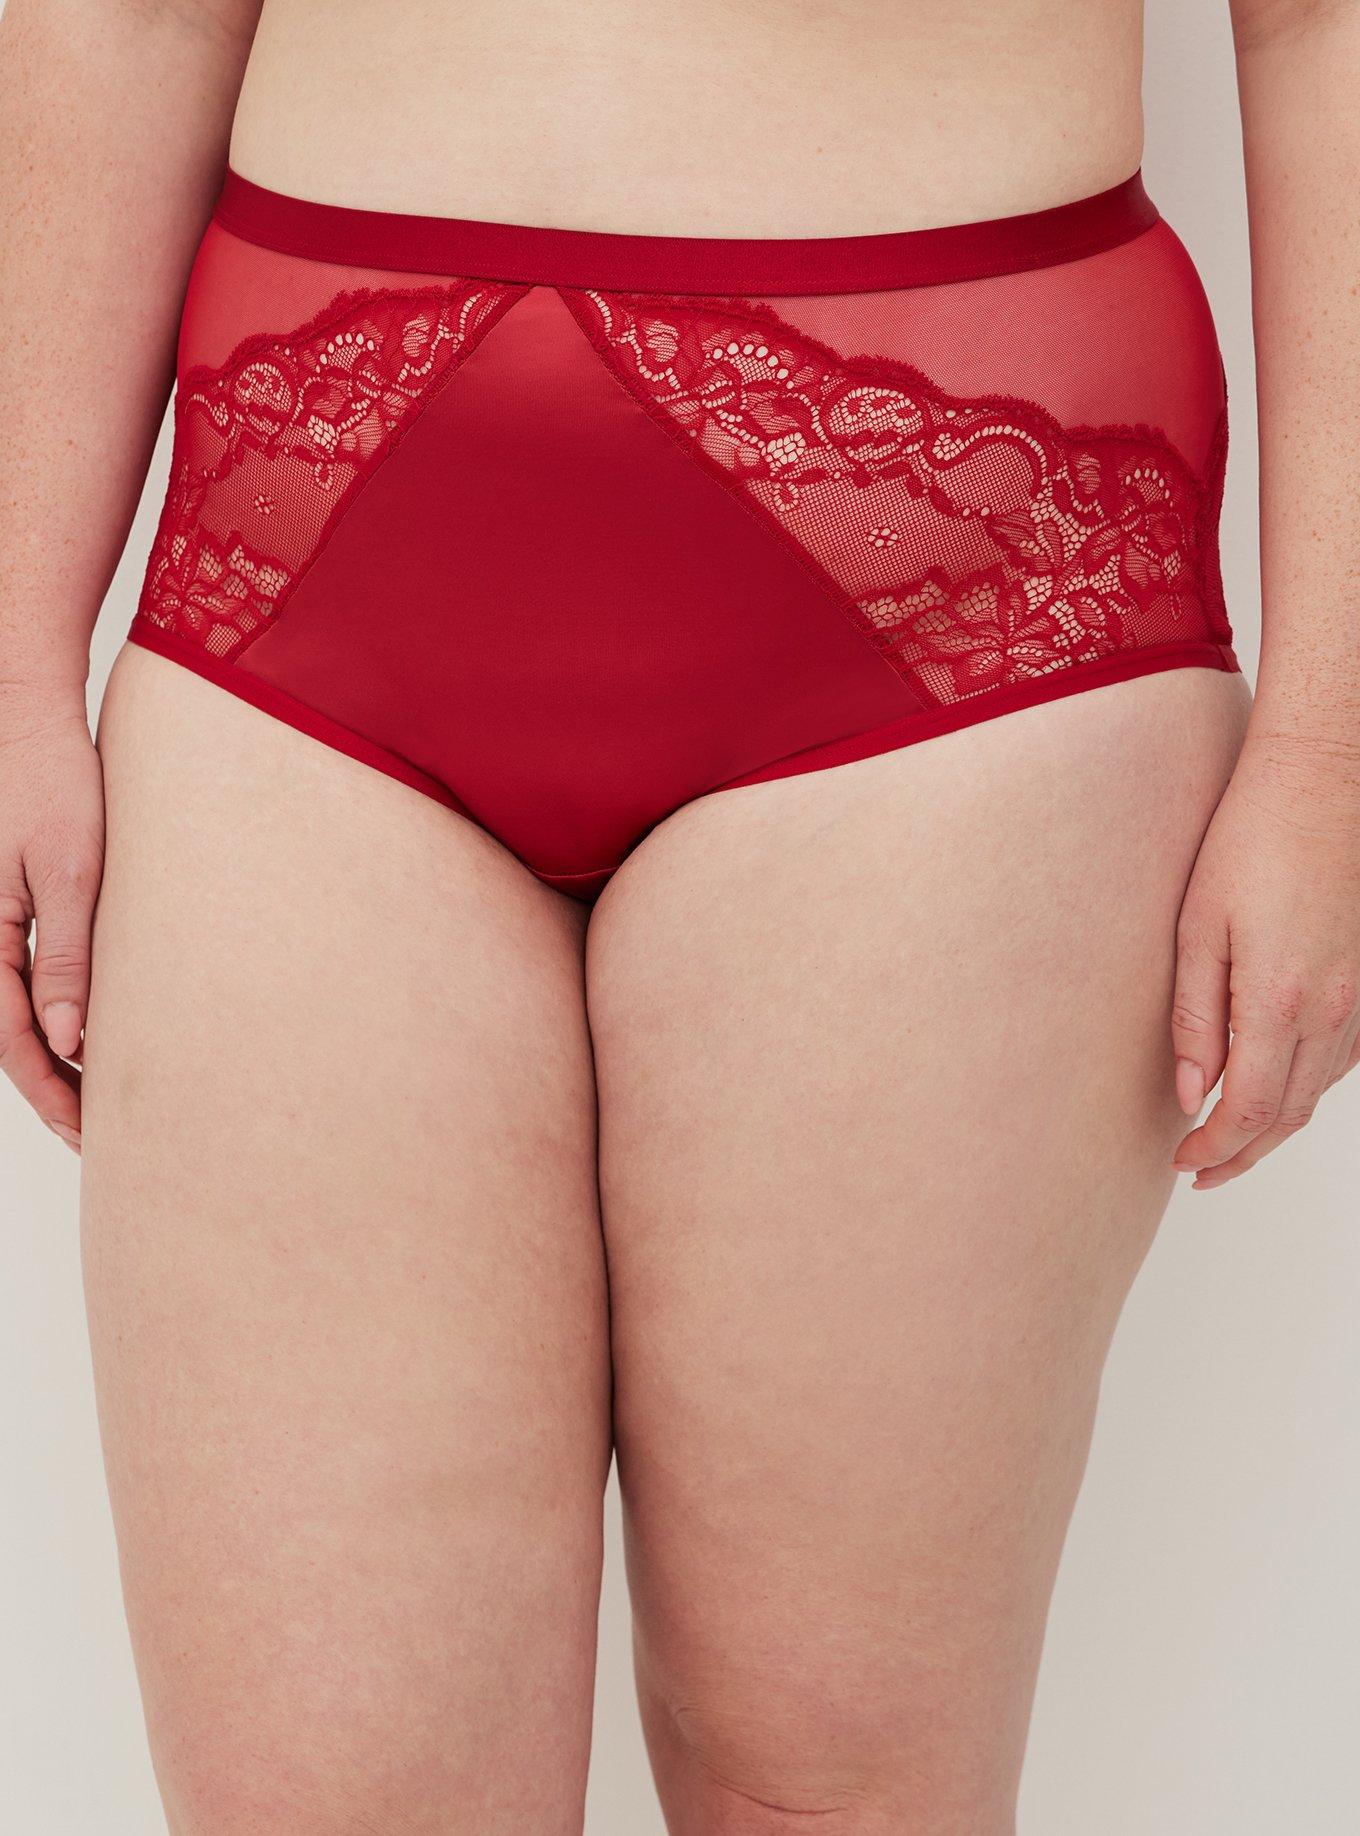 Torrid - Today is the LAST DAY to shop our Sexy Sale! All panties